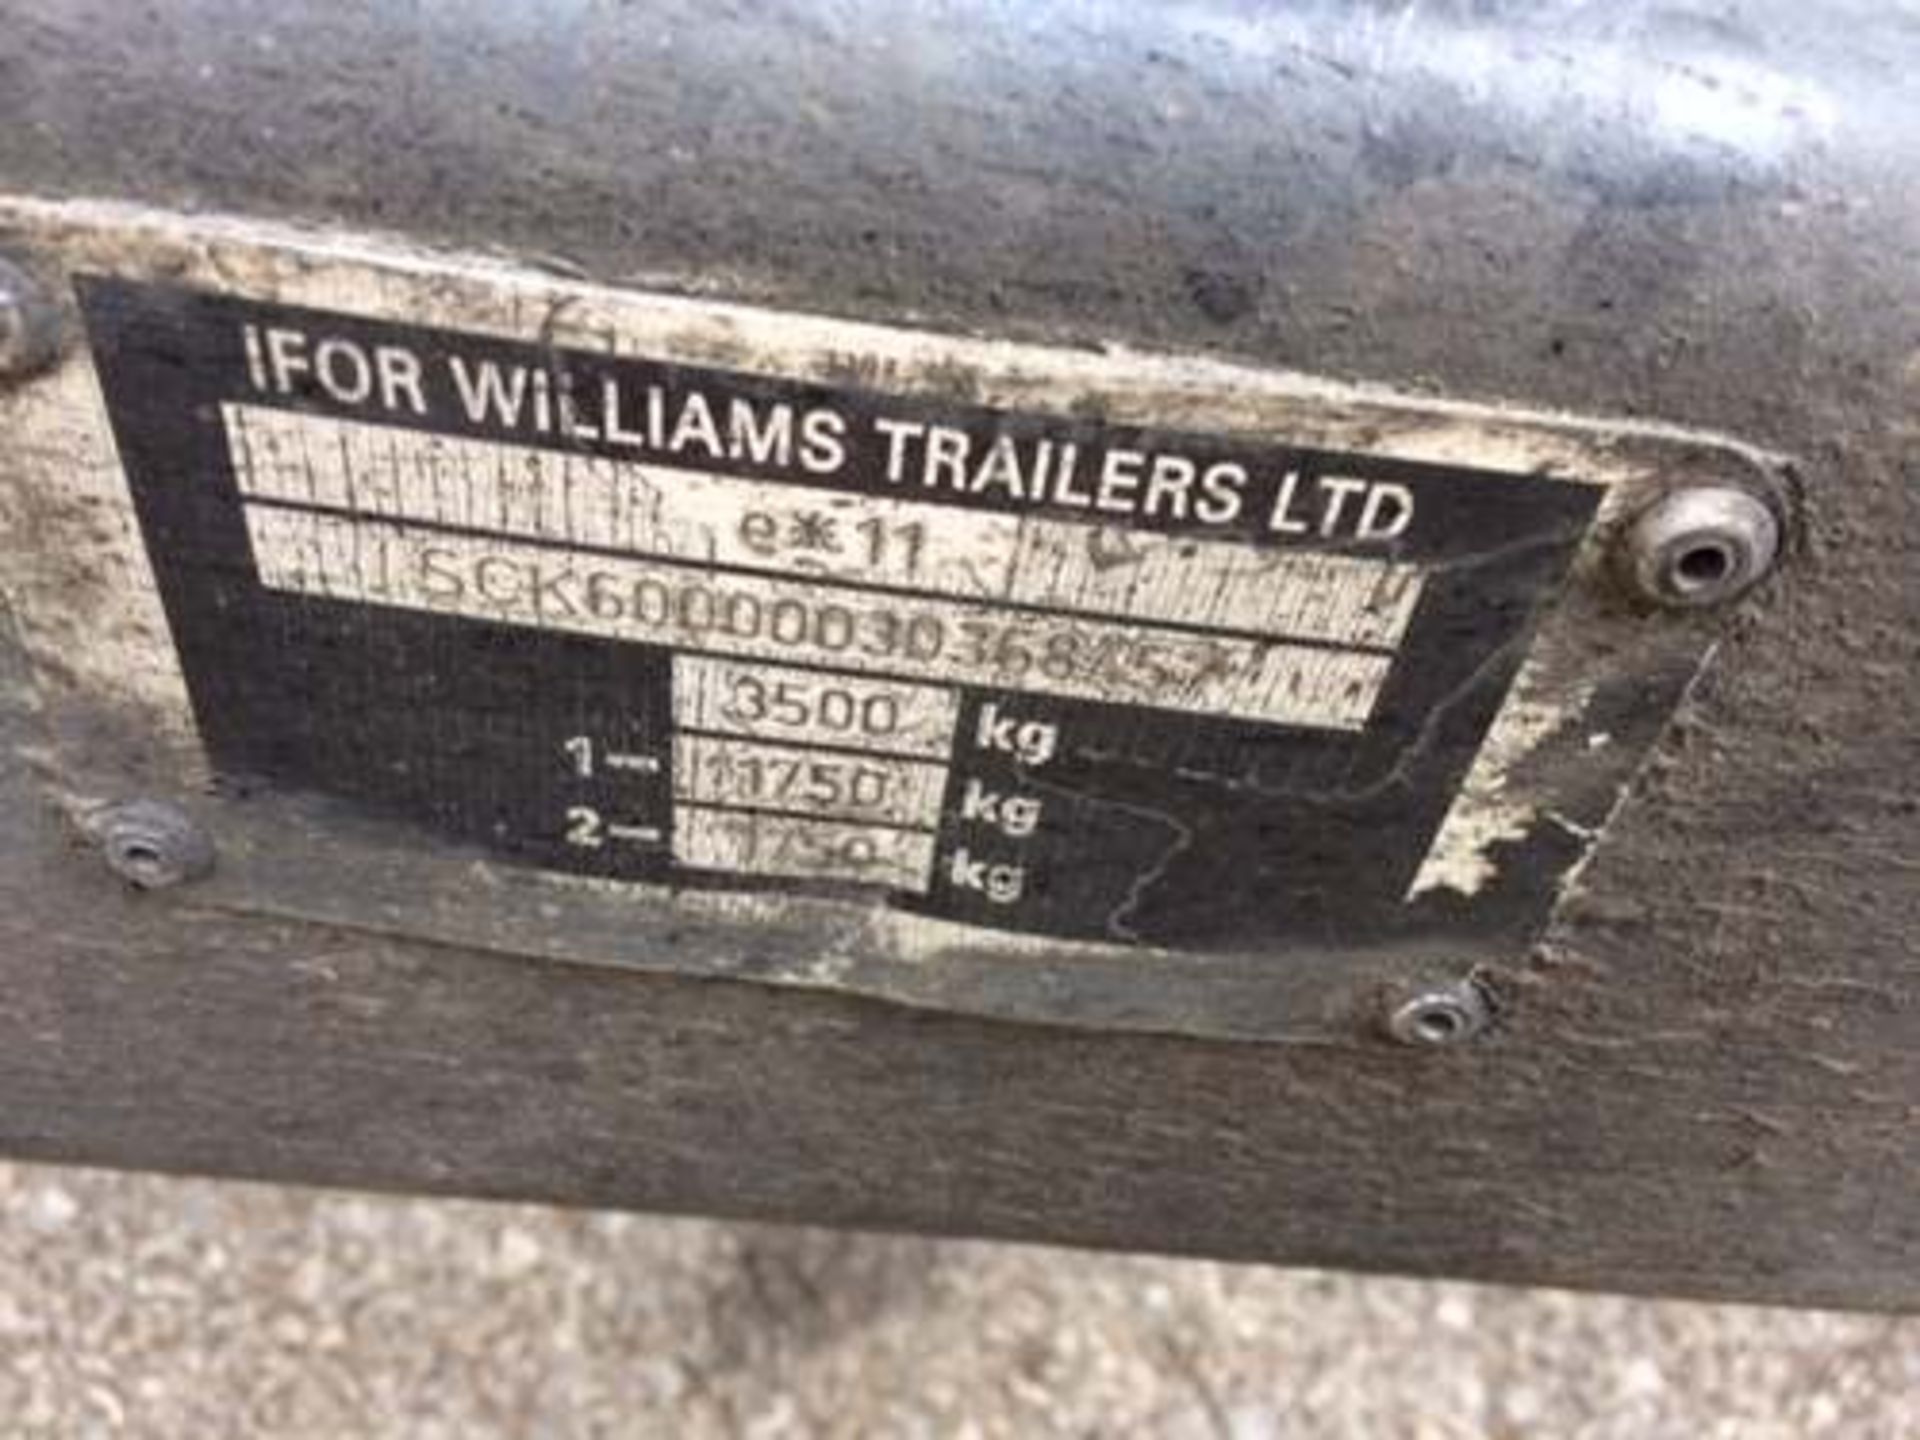 Chassis number SCK60000030368457 IFOR WILLIAMS - Tilt bed beaver tail tandem axle car trailer - Image 7 of 8